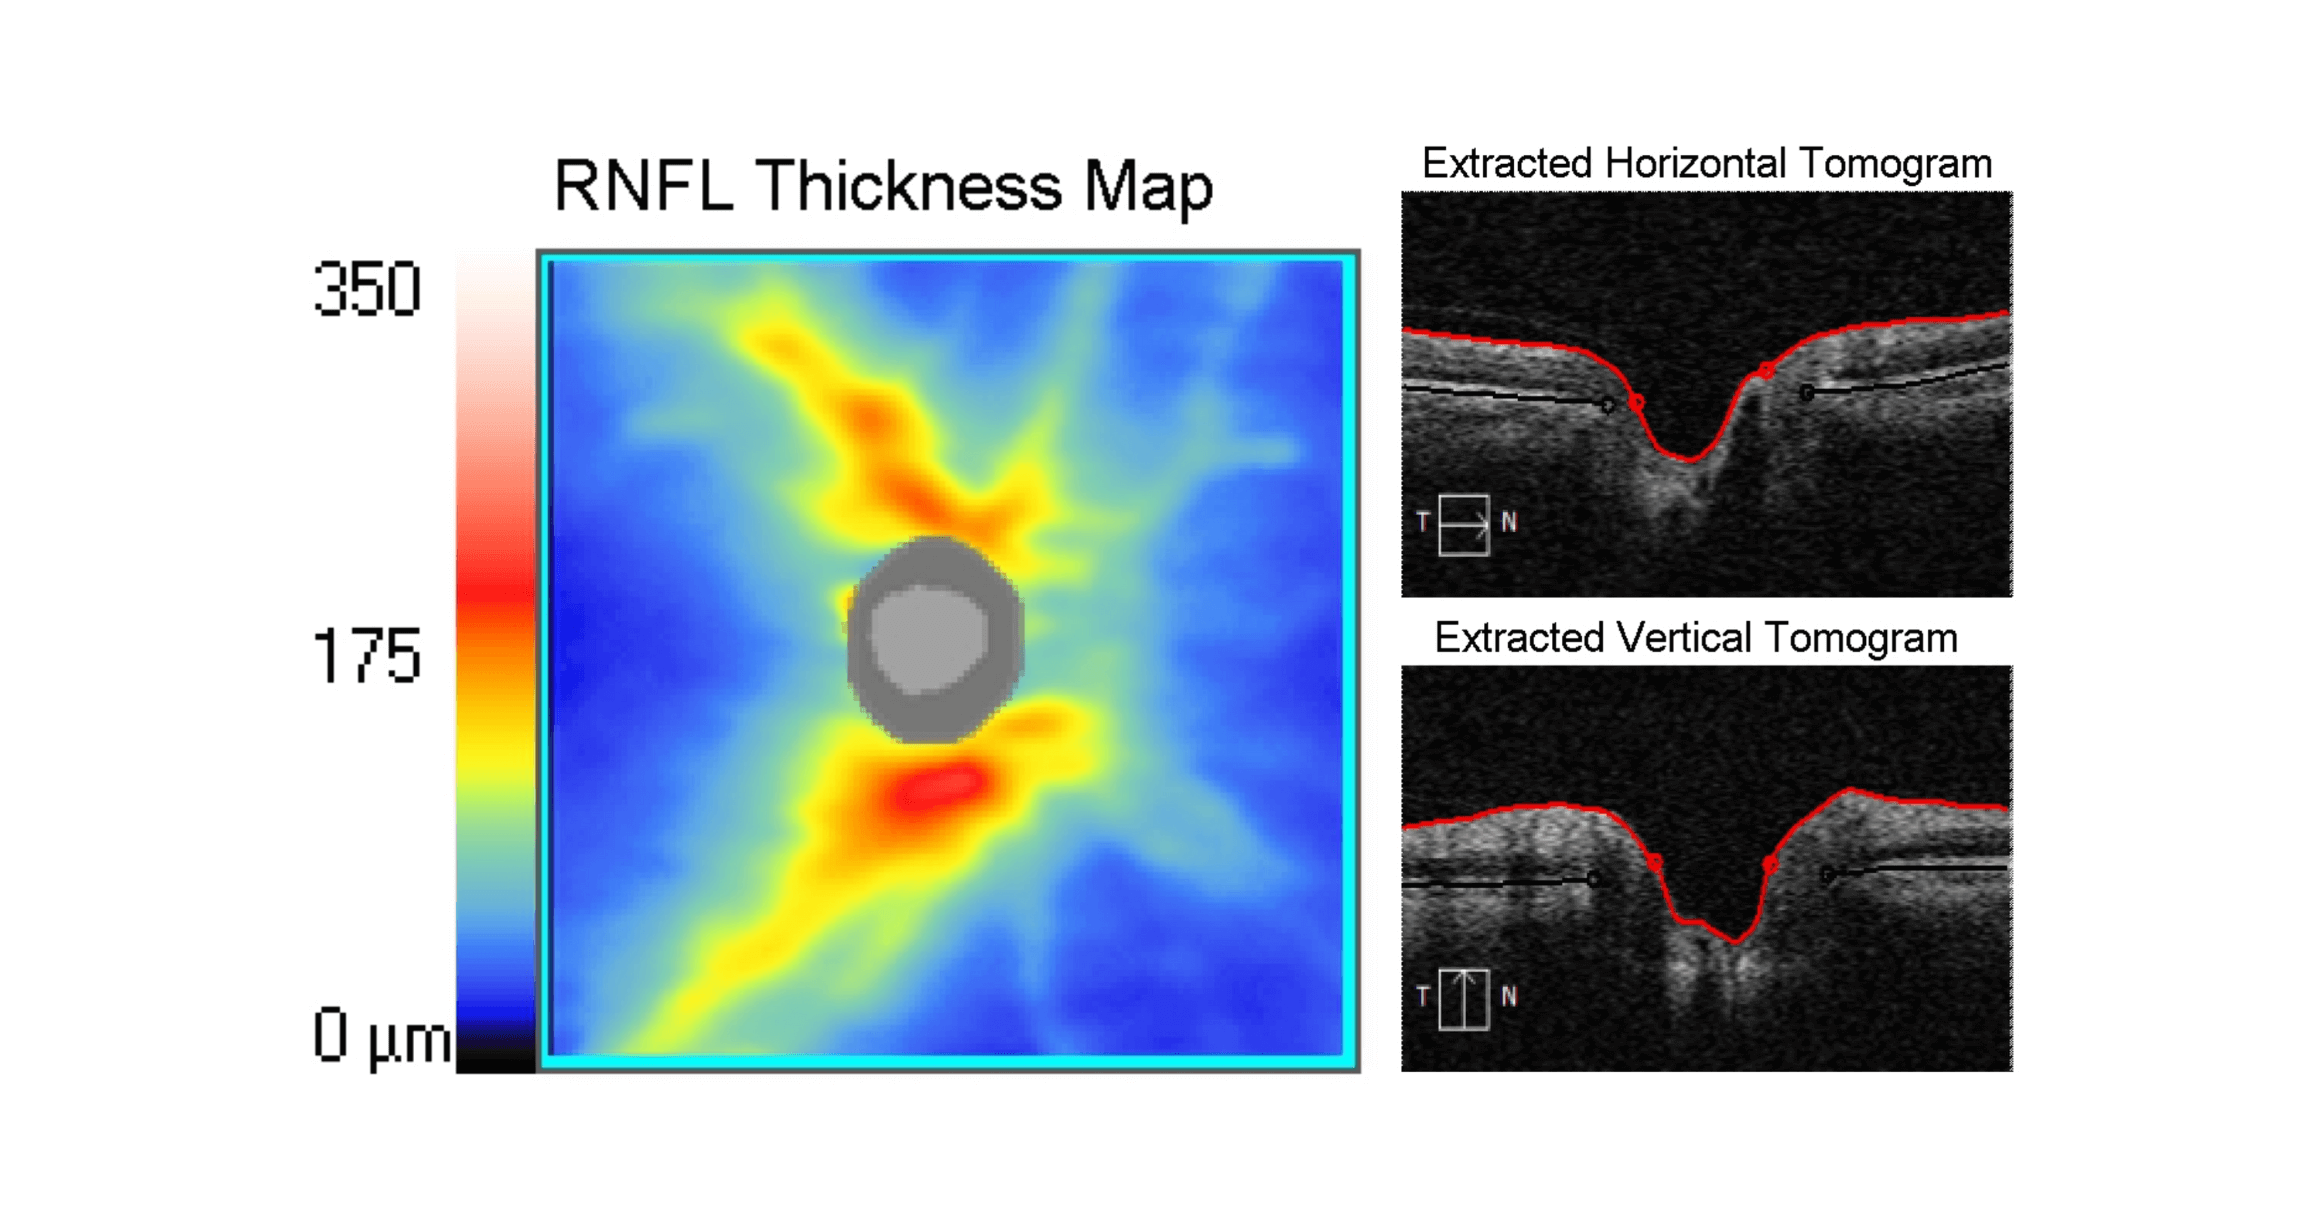 OCT test results showing the Retinal Nerve Fibre Layer (RNFL) of an eye without glaucoma